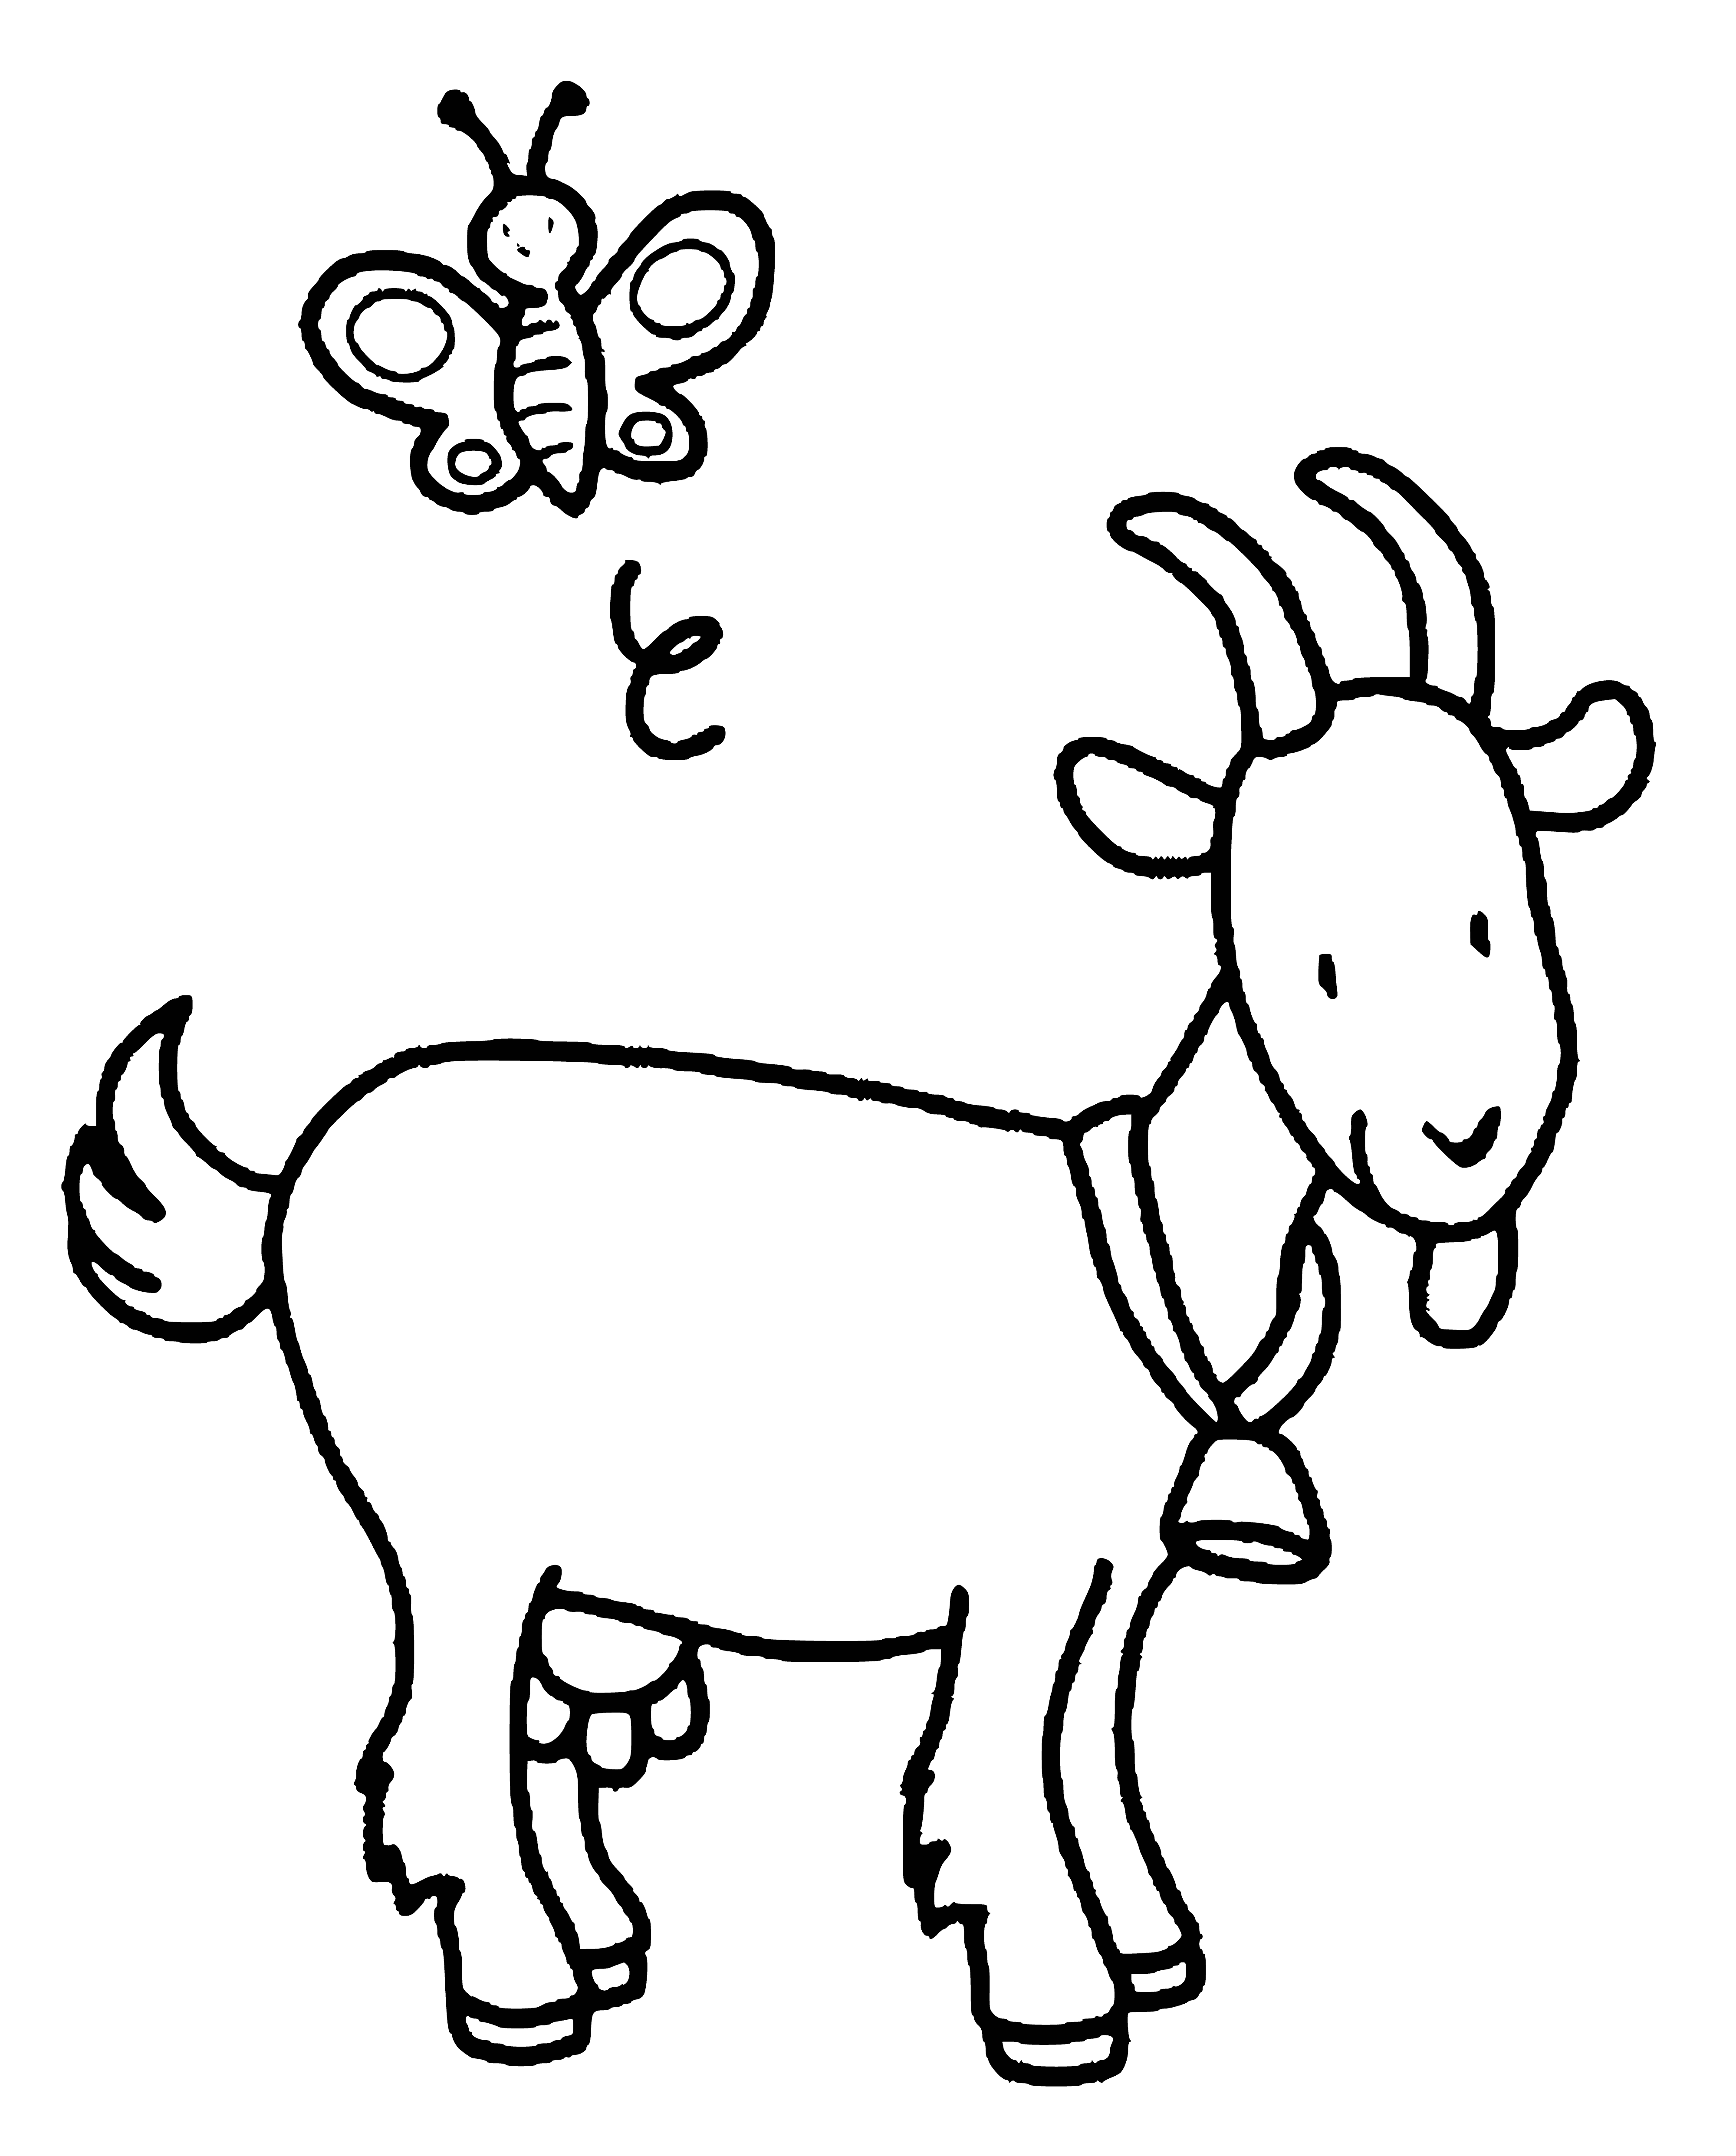 Goat with a bell on its neck coloring page